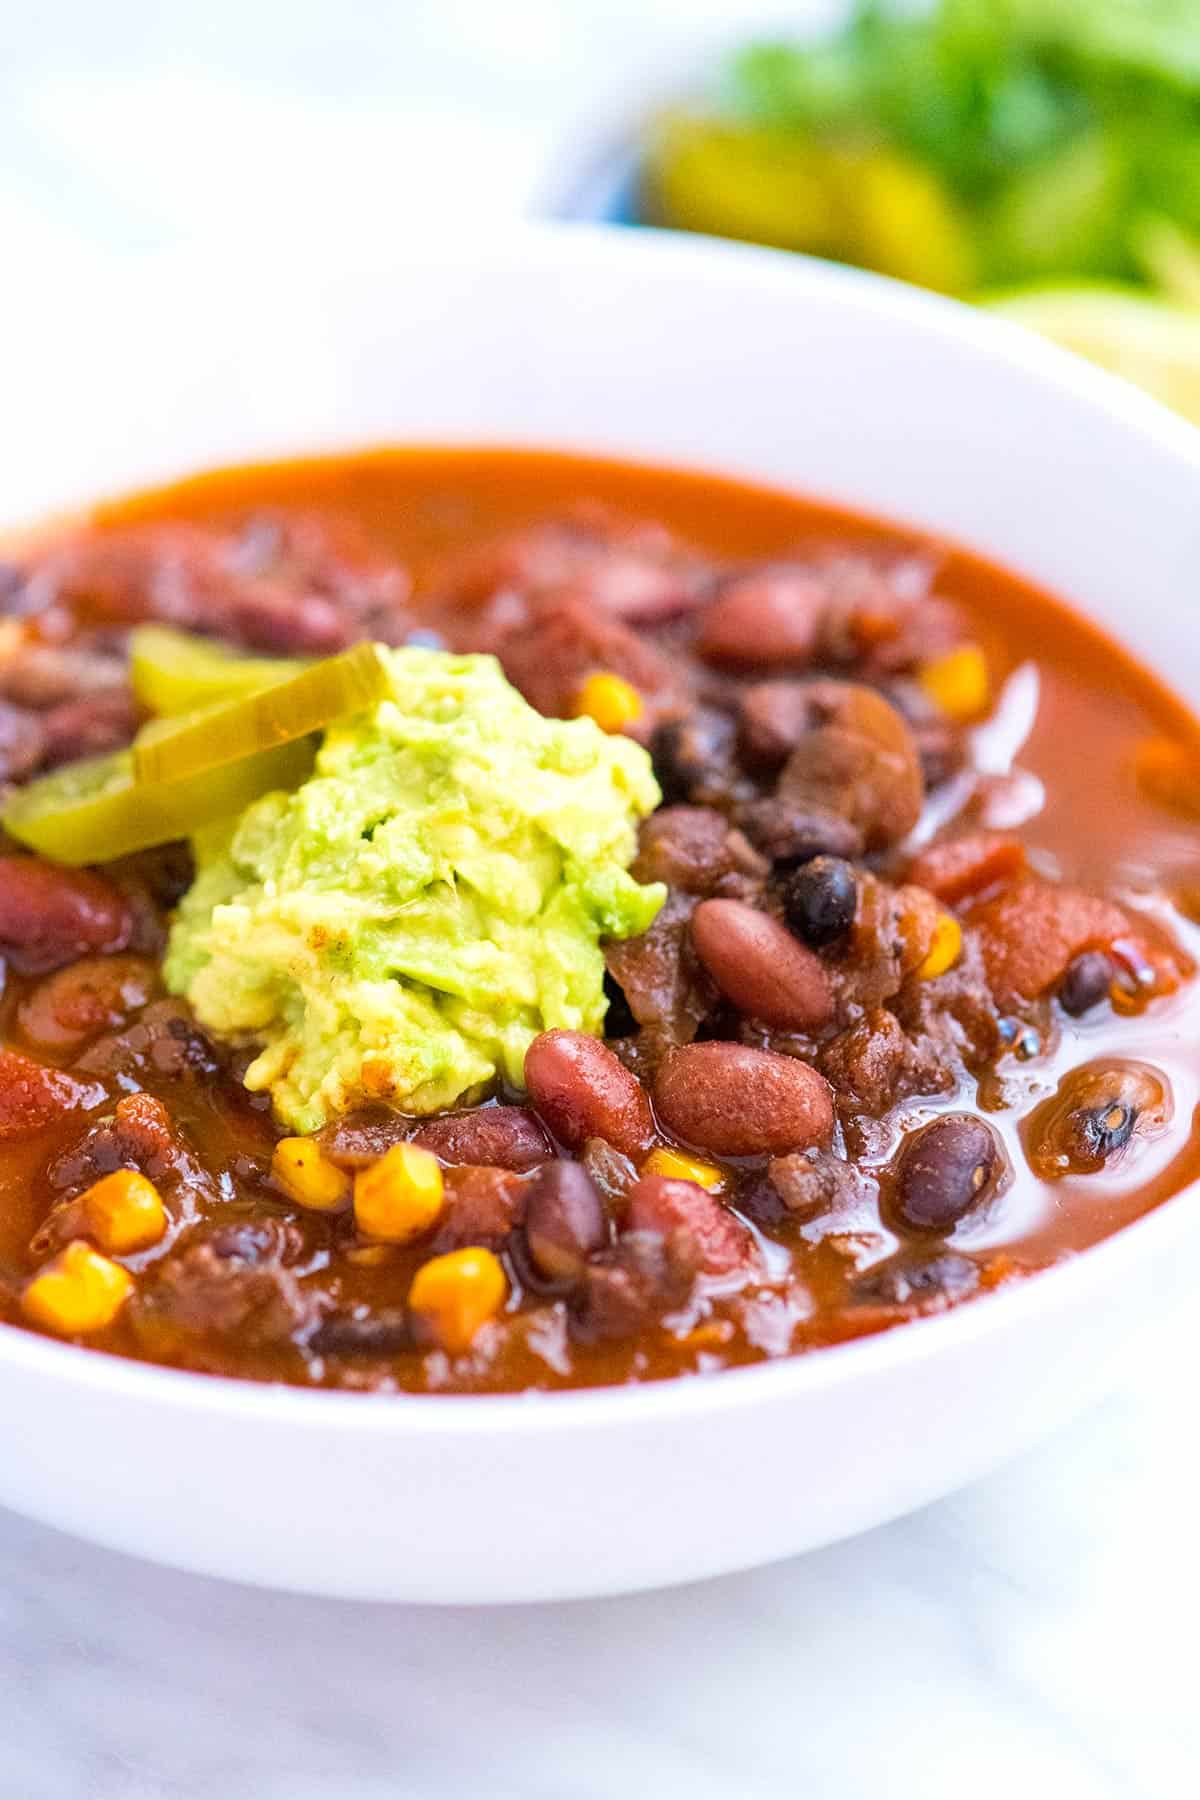 Bowl of vegetarian bean chili with avocado on top.